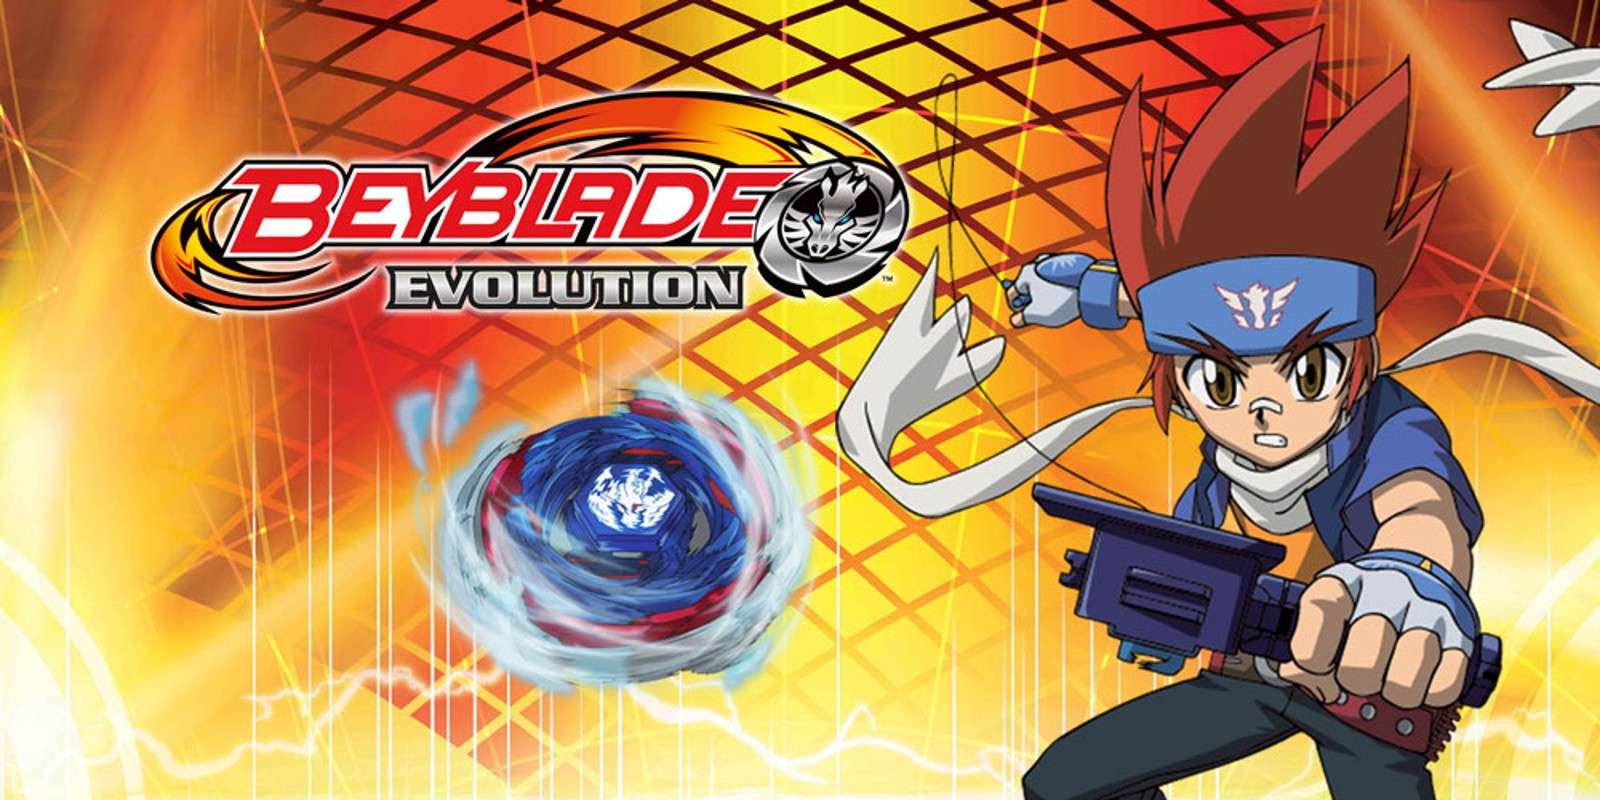 Beyblade live action